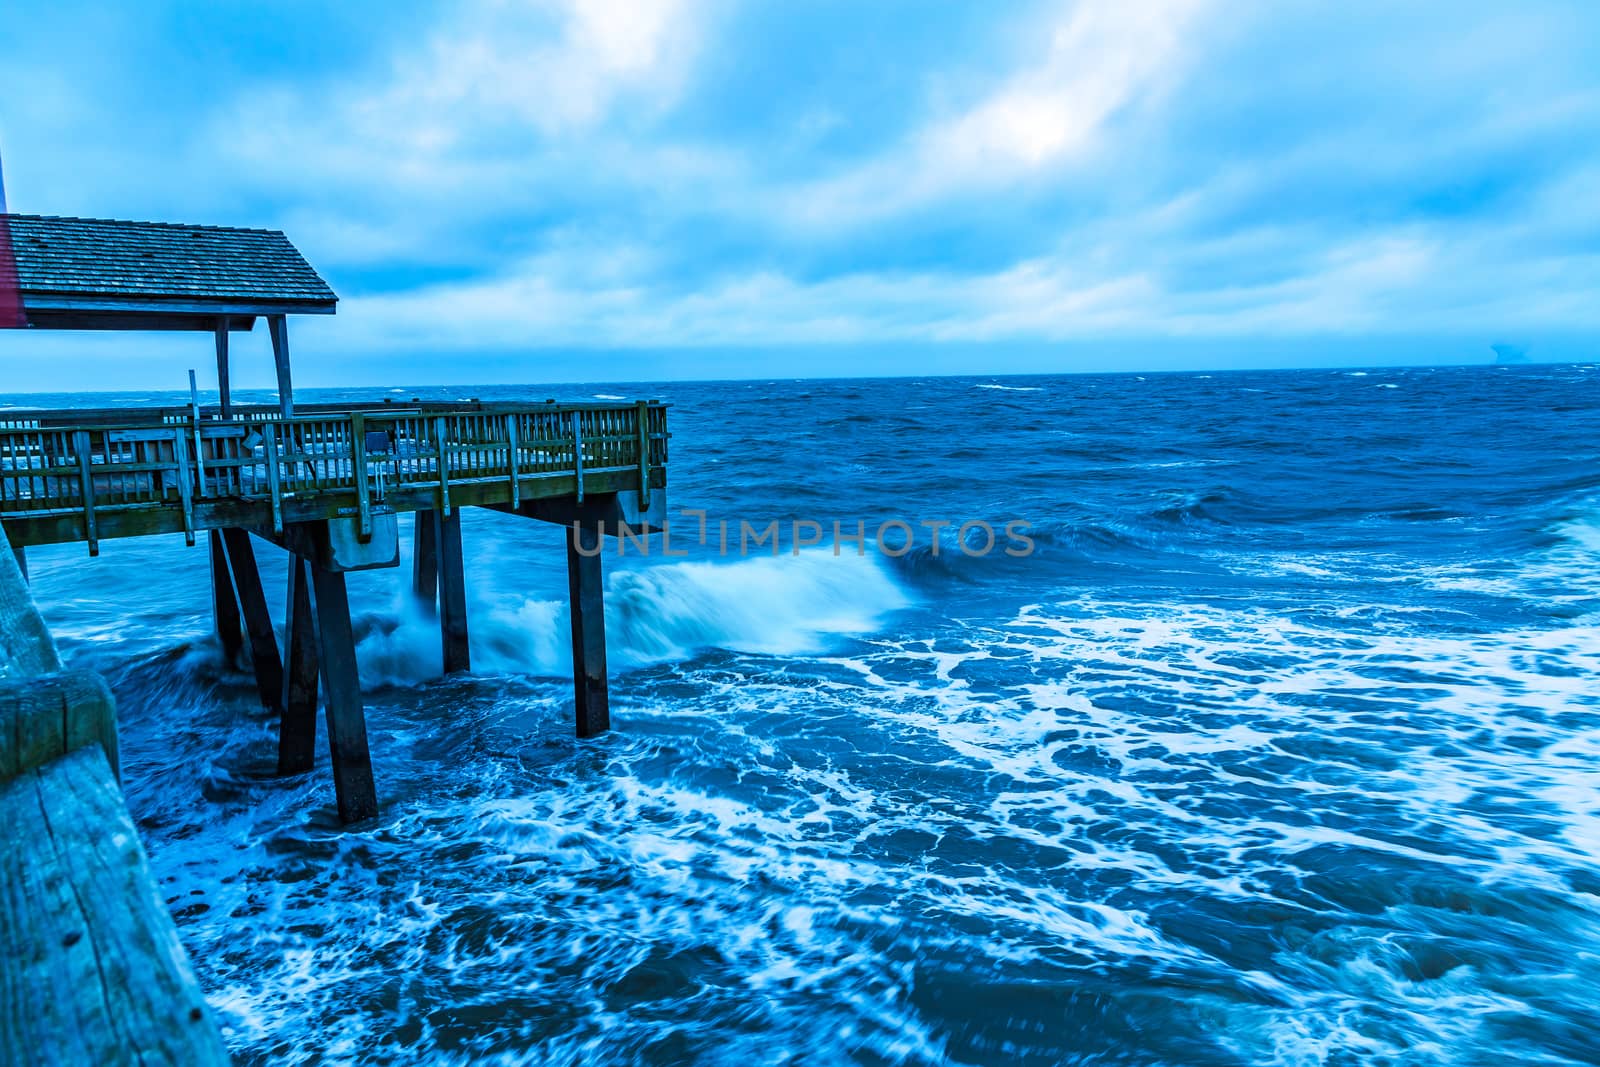 Stormy Morning at the Pier by adifferentbrian